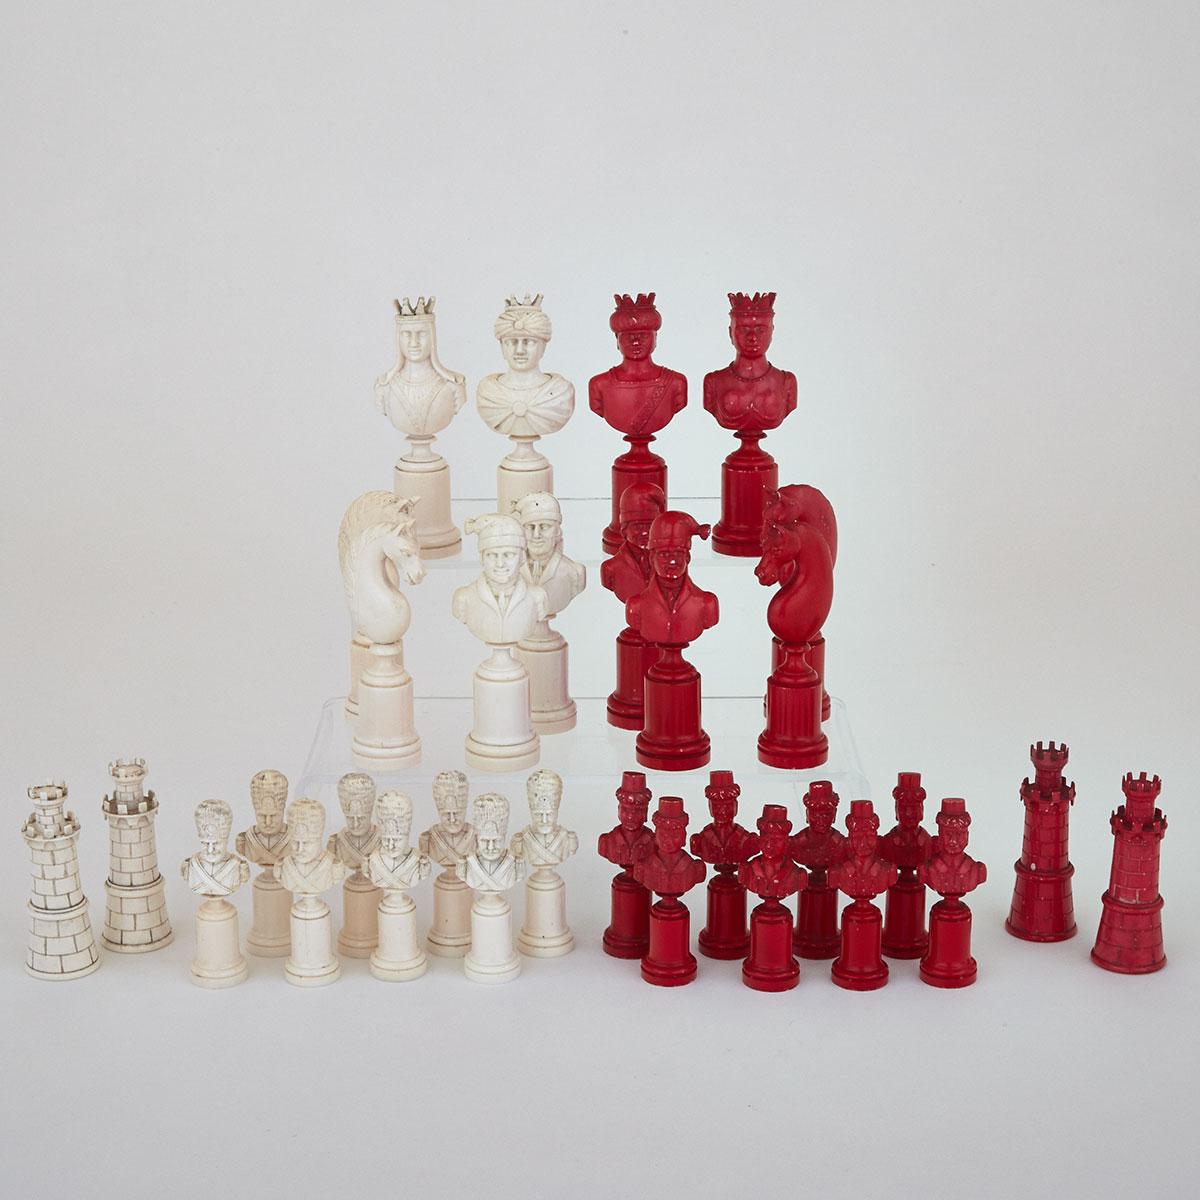 French Turned and Carved Ivory Europe vs. Moors Bust Form Chess Set, 19th century